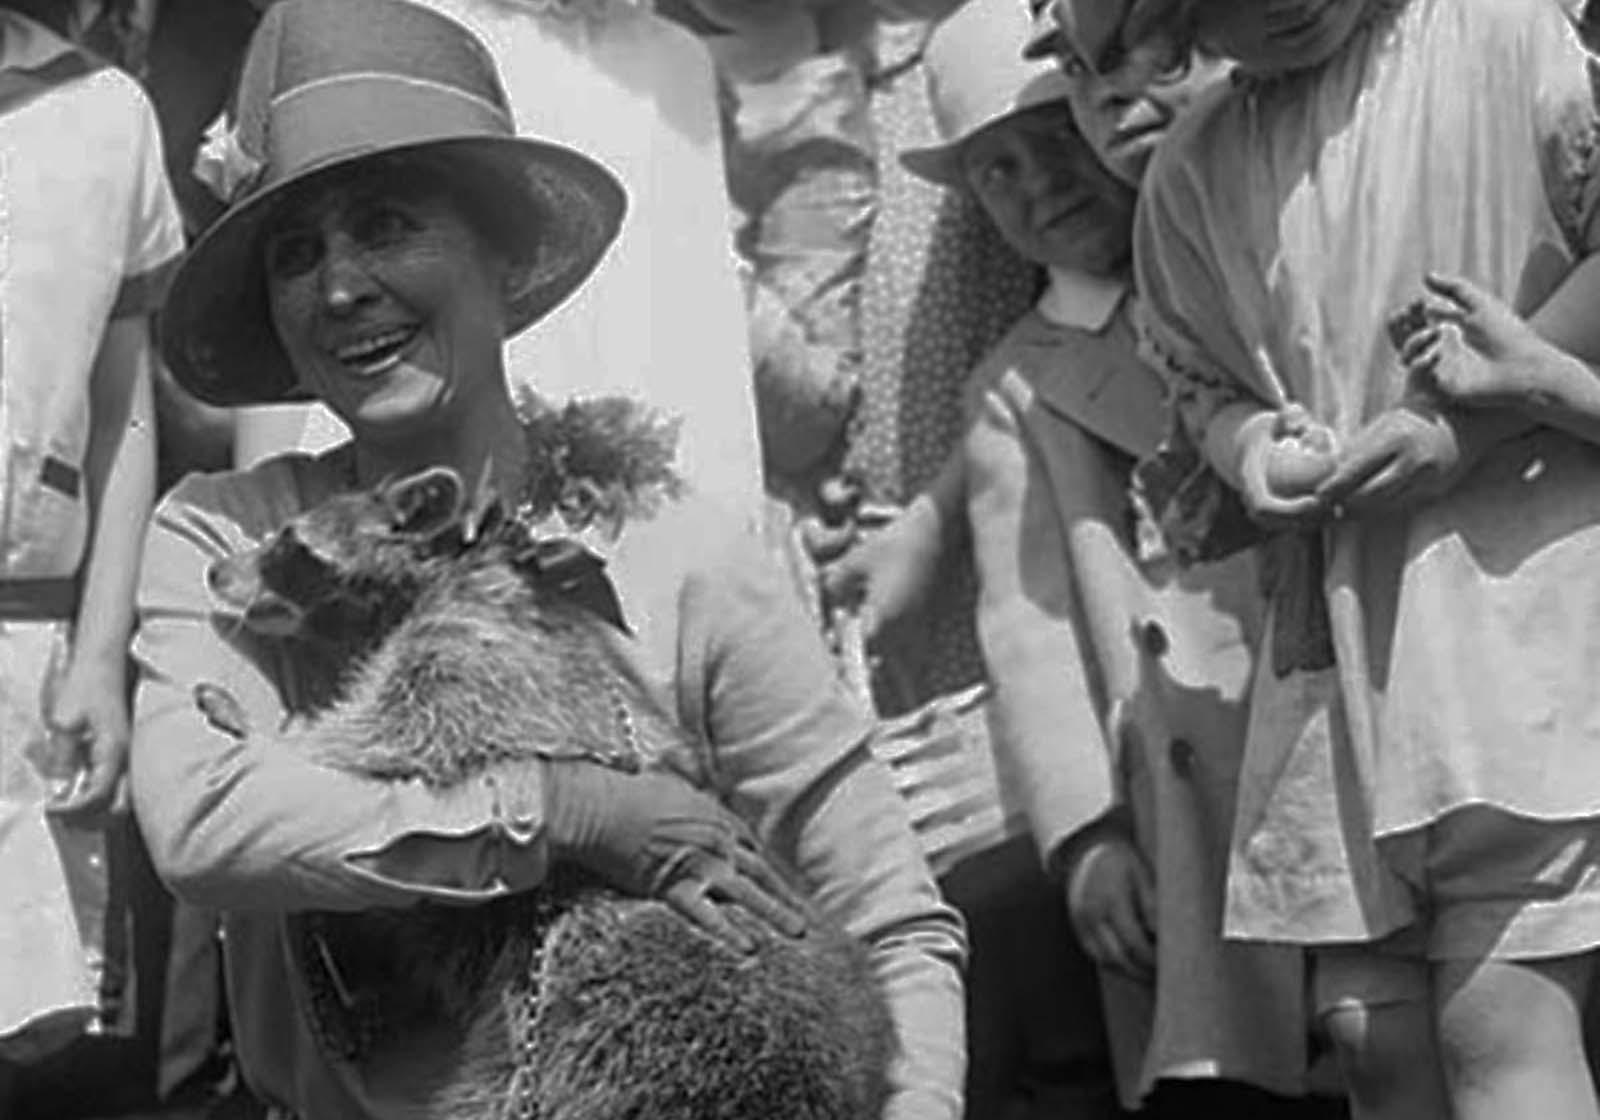 Rebecca, pet raccoon of Calvin Coolidge, was originally brought to the White House with the intention of being eaten at a Thanksgiving dinner. Was eating raccoons common among high society in 1920s America?